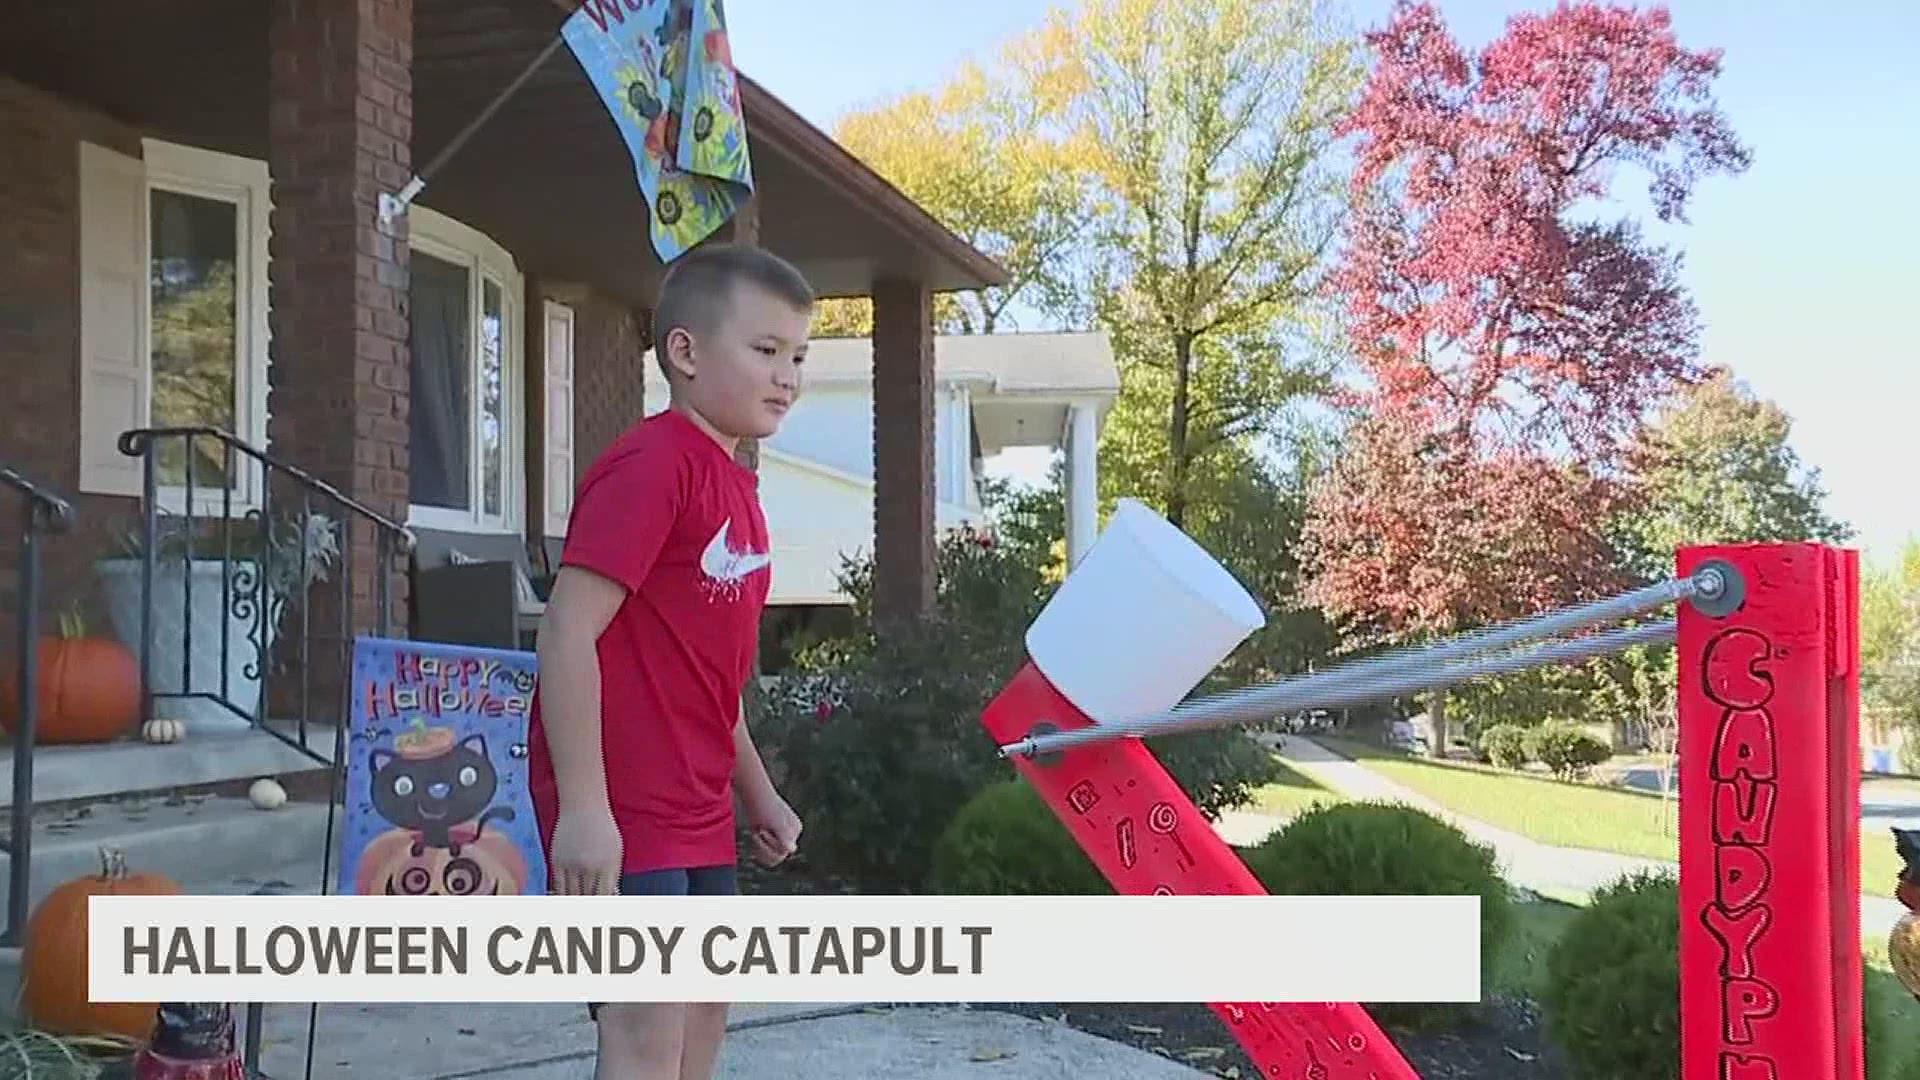 A family in York County created a Halloween candy catapult to still allow for trick or treating while social distancing.